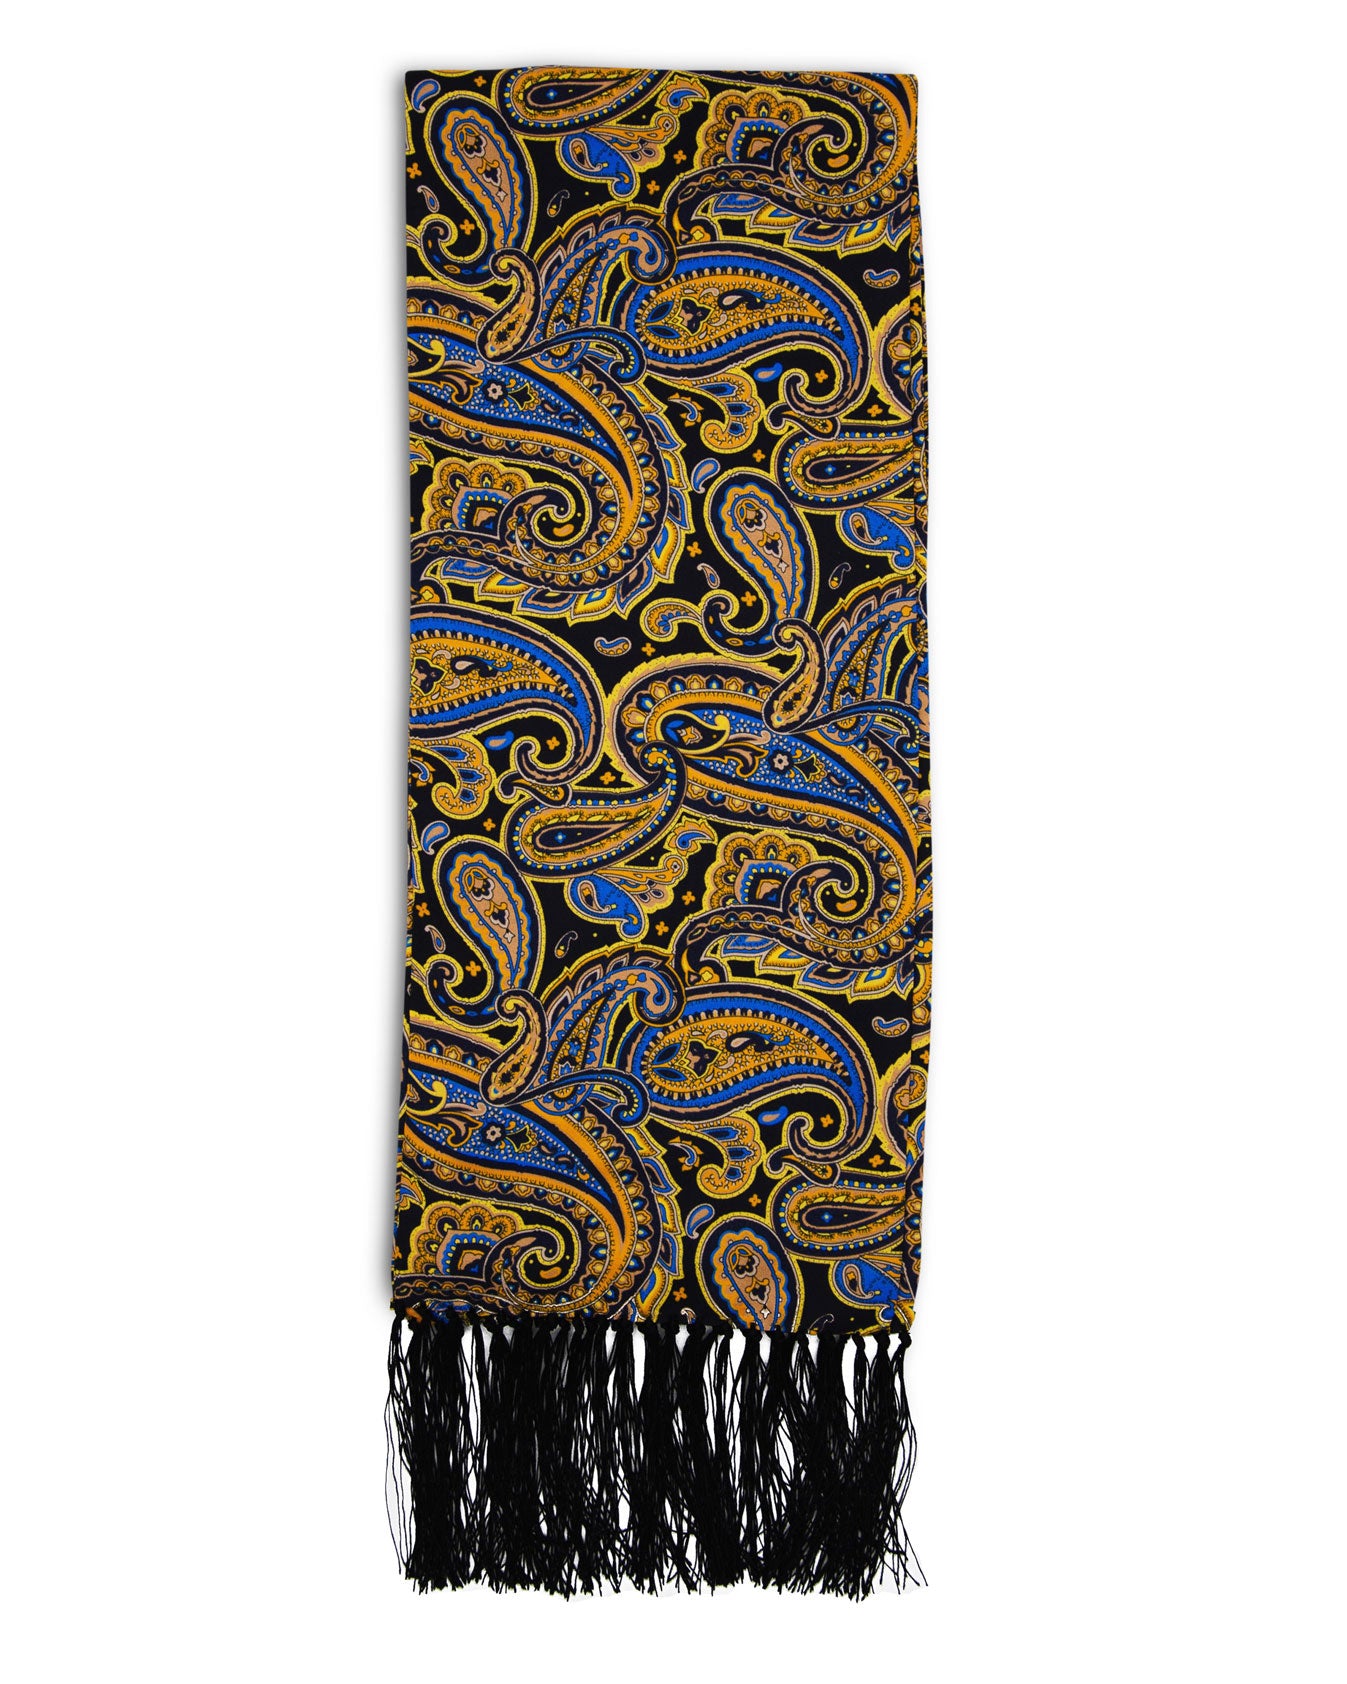 A flat view of 'The Ormond' silk aviator scarf. Clearly showing the intricate swirls of blue and yellow-gold paisley set on a black ground with matching 3 inch fringe.